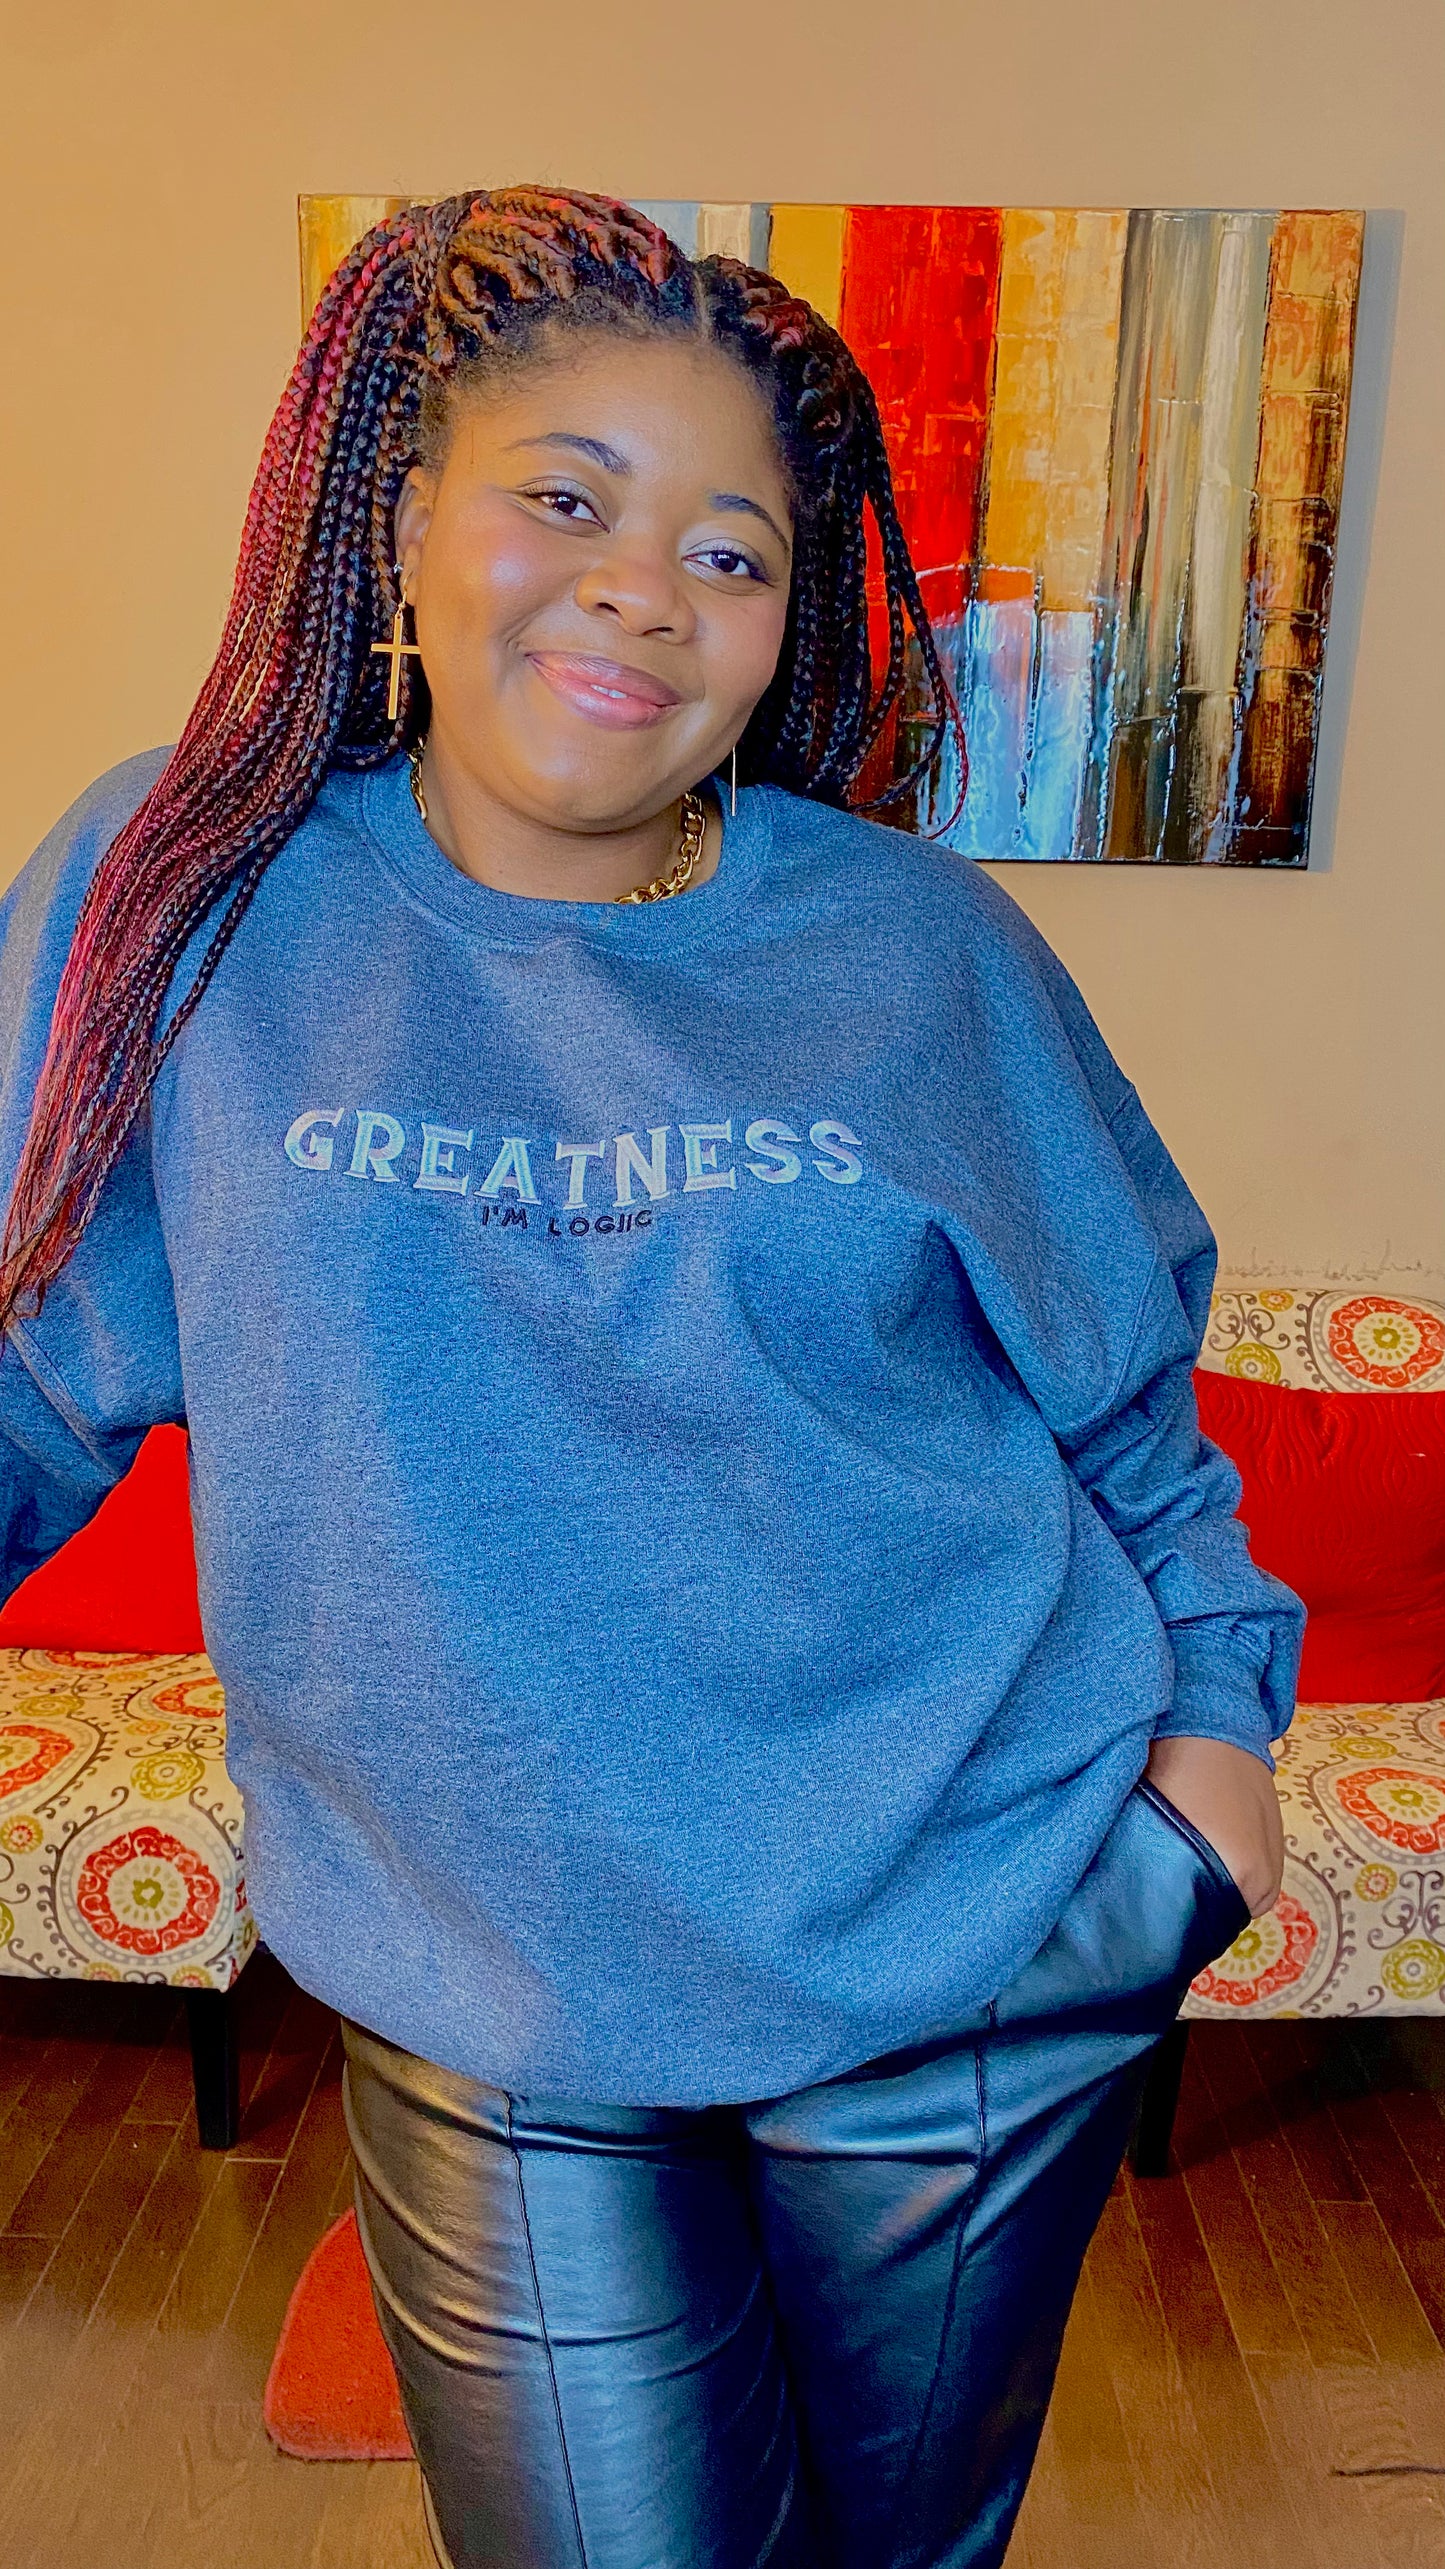 Greatness Embroidered Crew Neck - Shirts & Tops